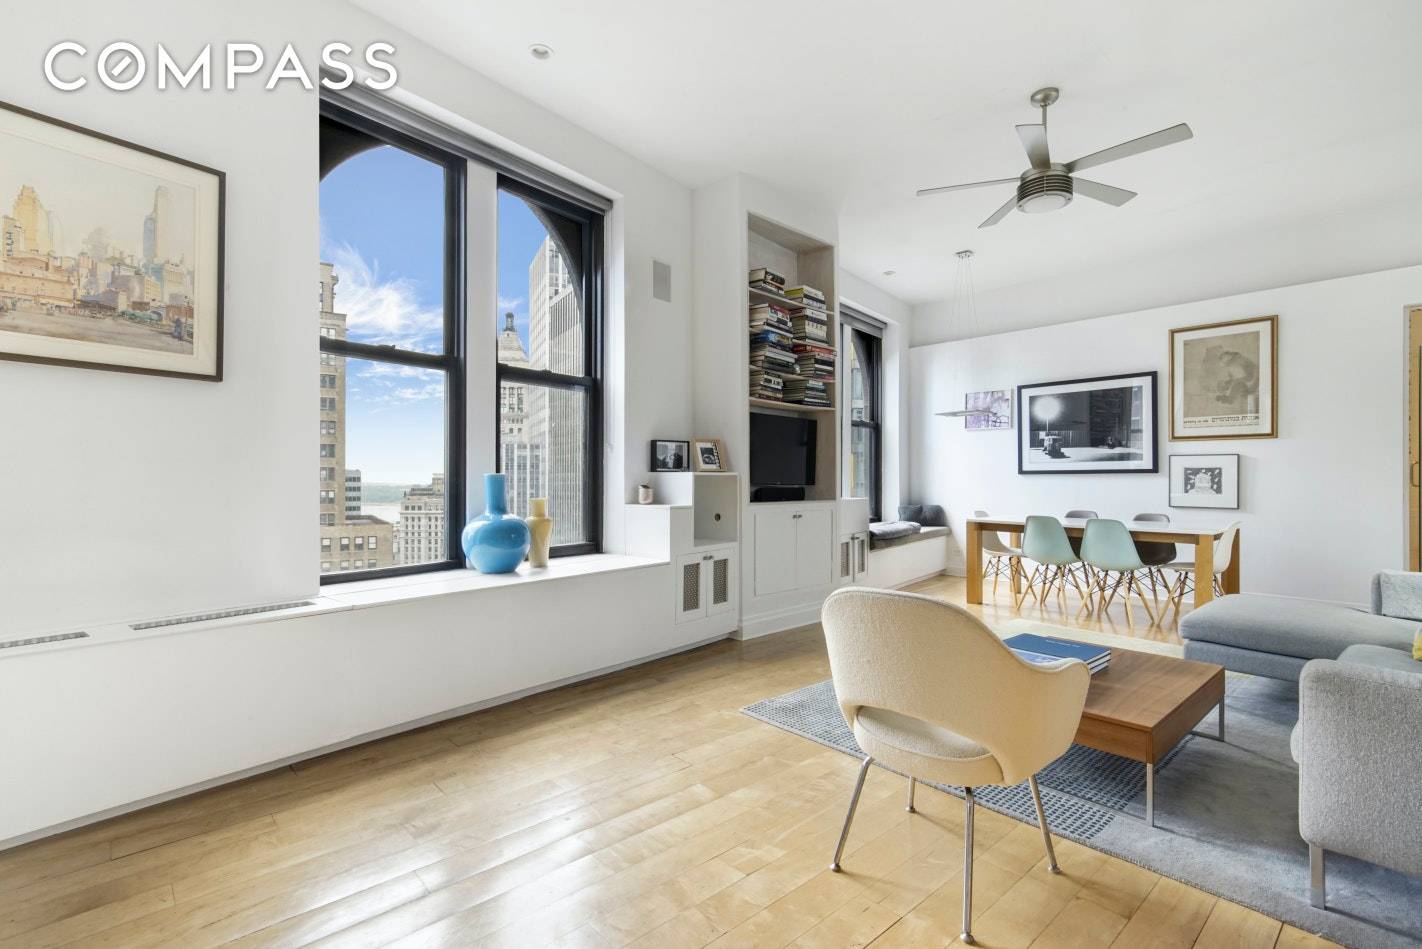 Shown by appointment only Bright, spacious, one bedroom convertible two bedroom two bathroom penthouse with SW facing views of FiDi s skyline and the Hudson River.